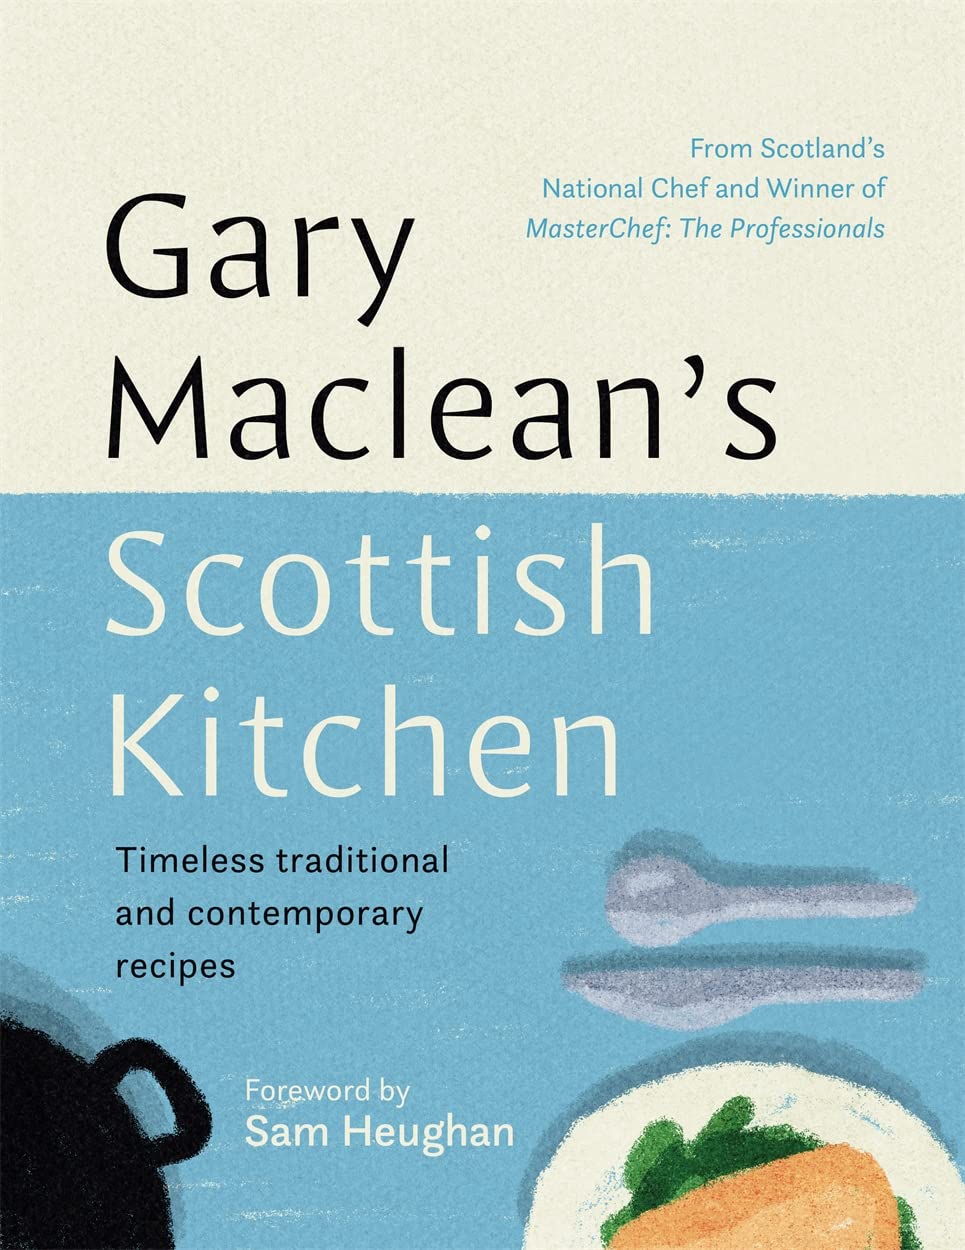 Gary Maclean's Scottish Kitchen: Timeless Traditional and Contemporary Recipes (Gary Maclean)